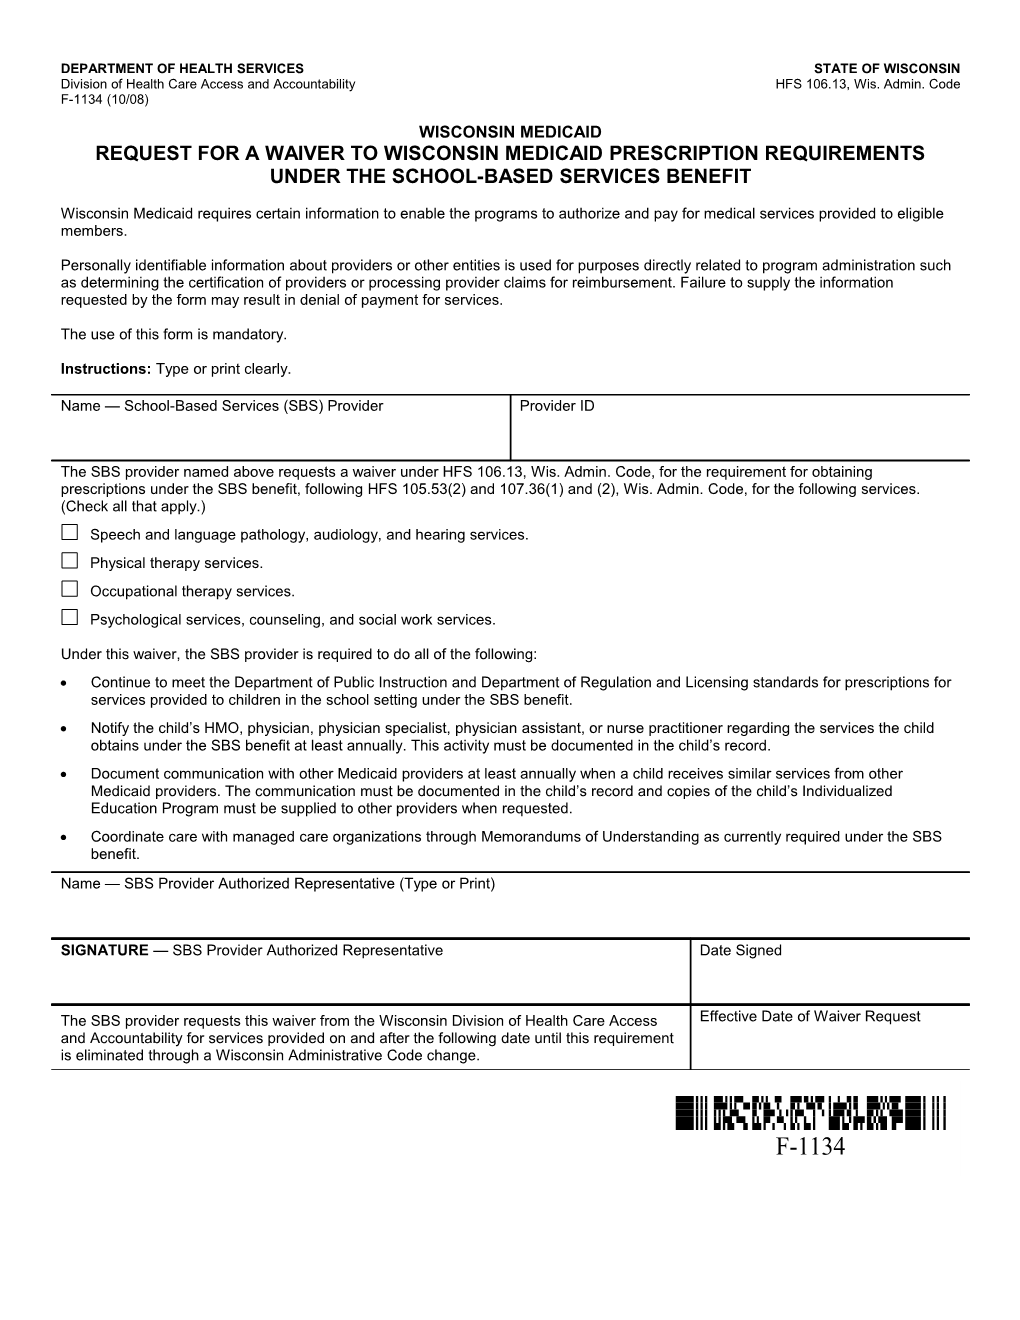 Wisconsin Medicaid Request for a Waiver to Wisconsin Medicaid Prescription Requirements